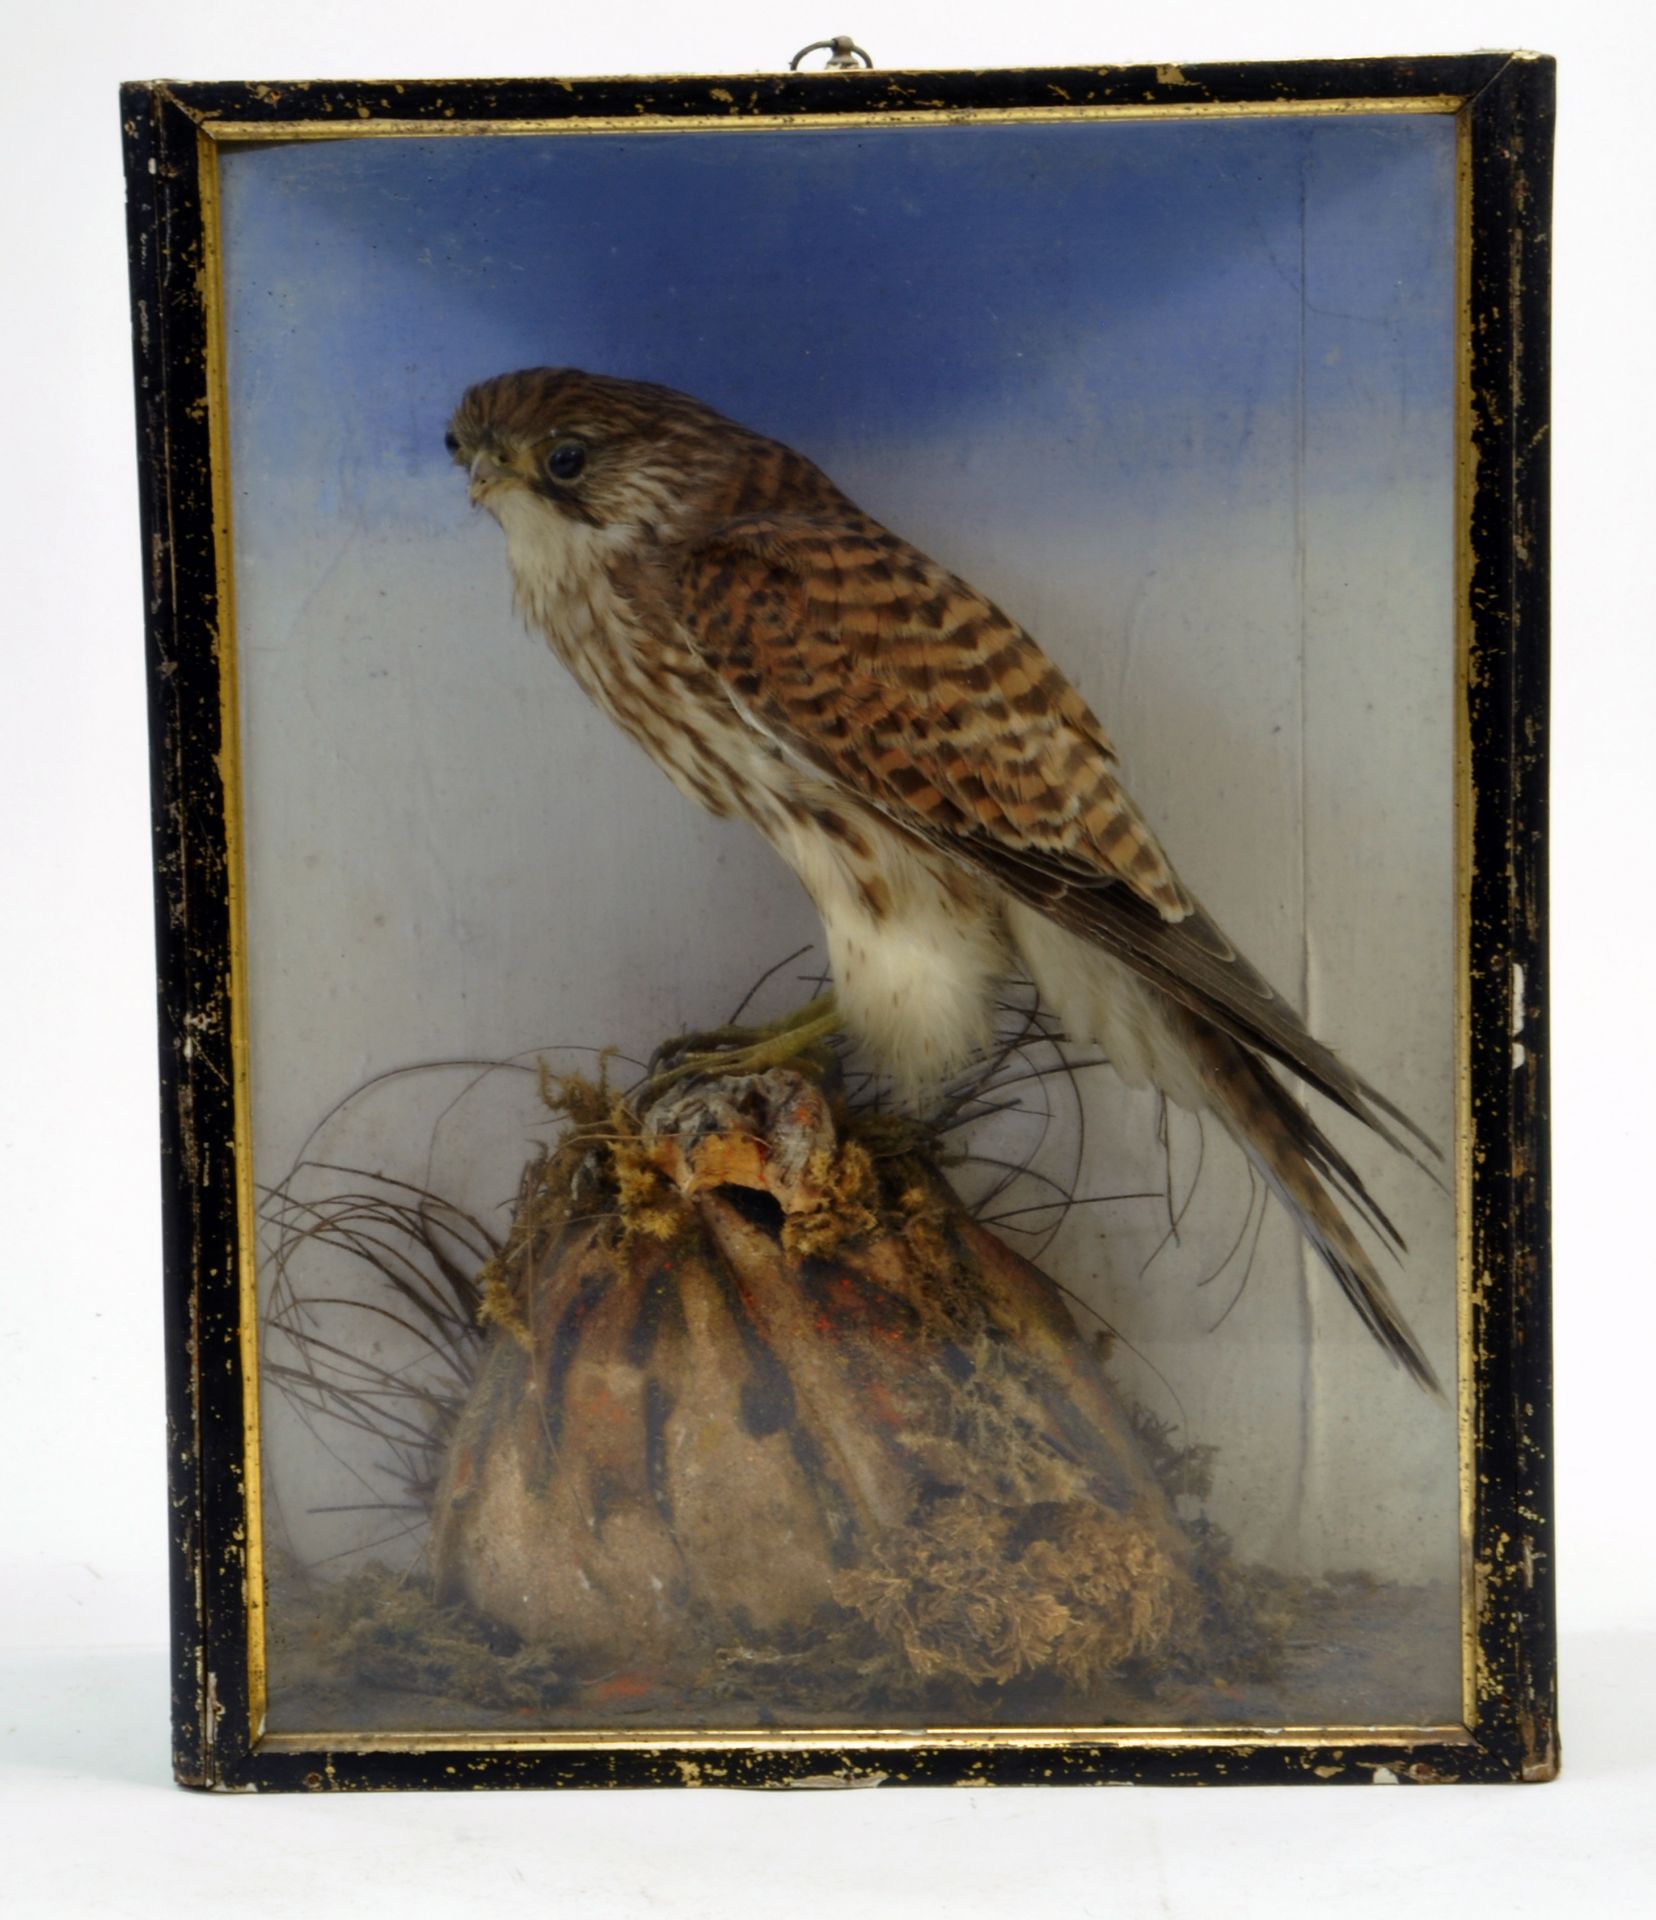 Taxidermy: An early 20th century example of a Sparrow Hawk (Accipiter nisus) in Wooden Display